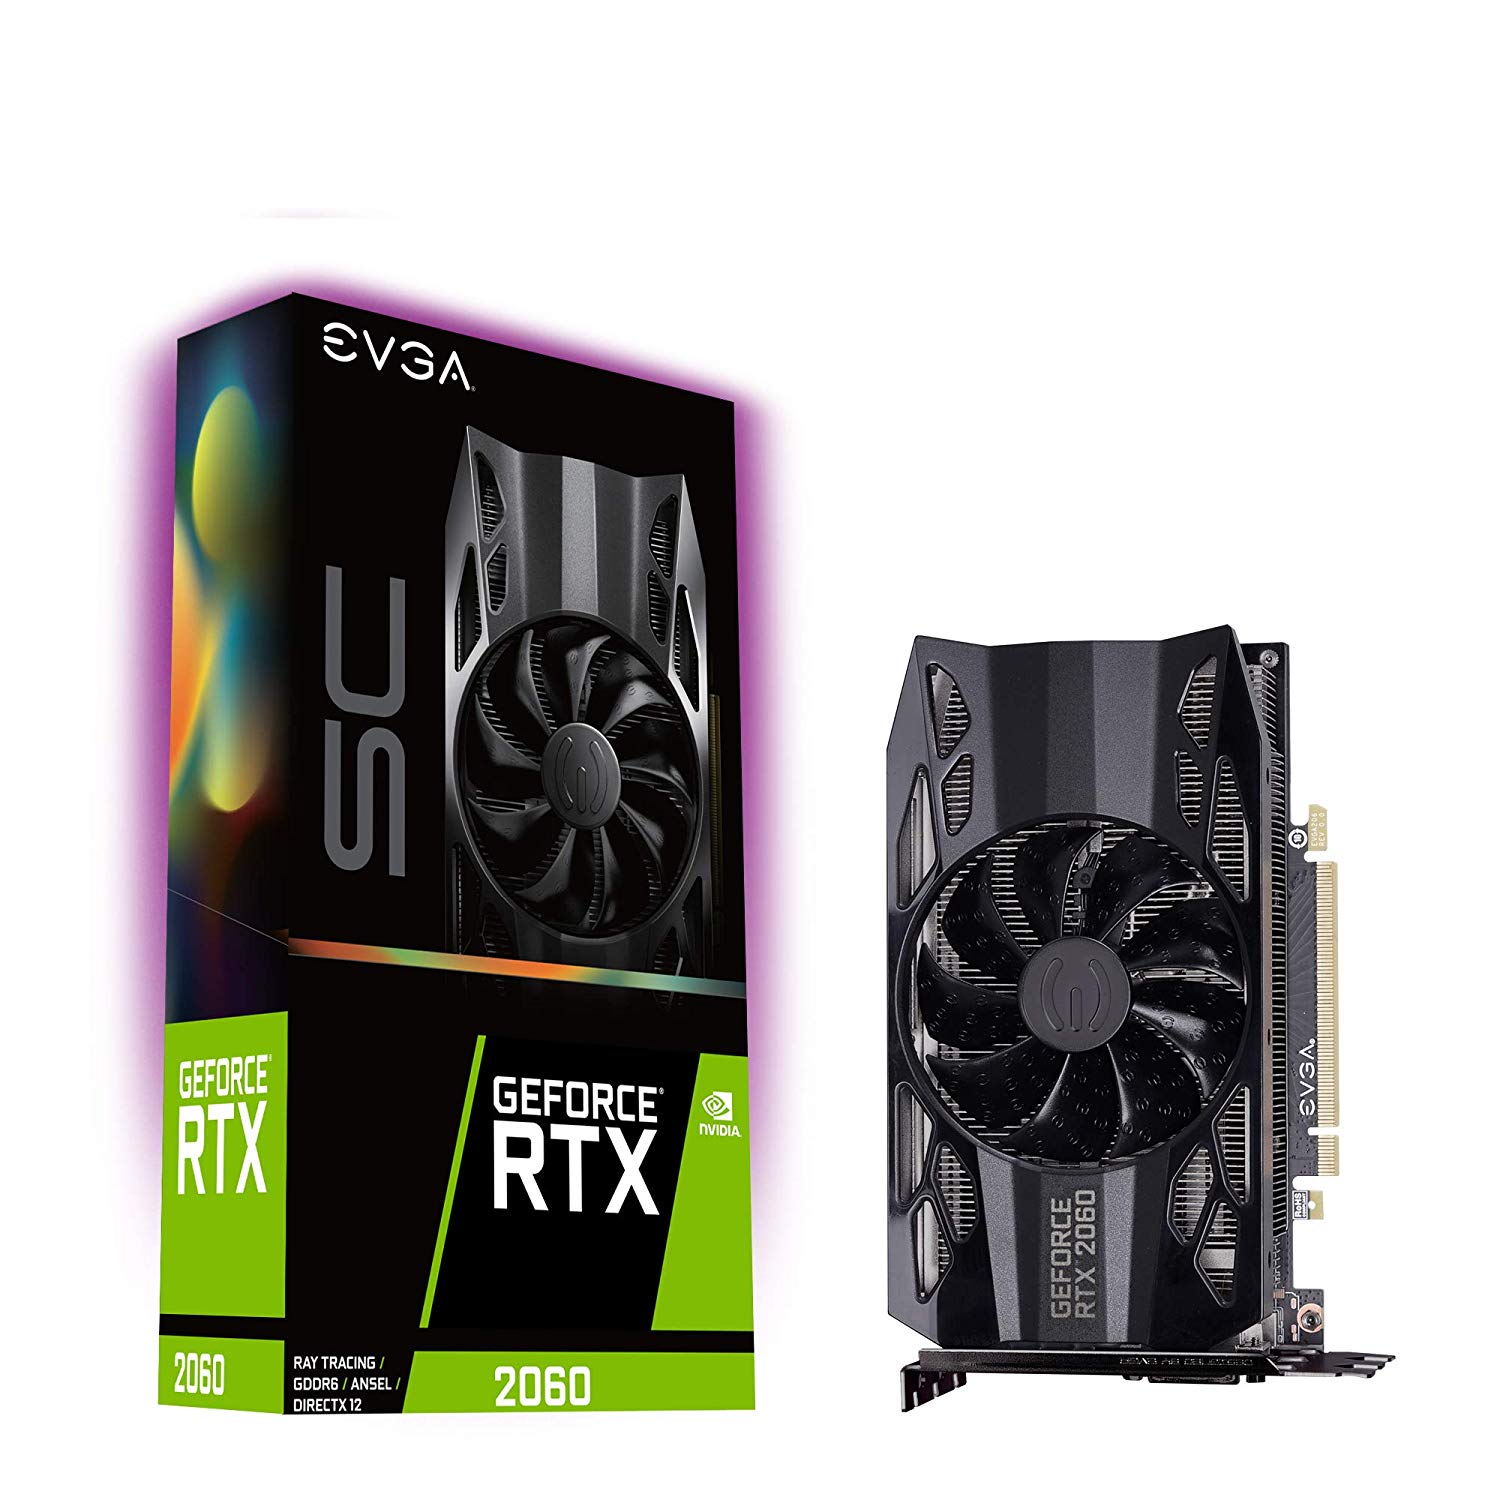 evga-geforce-rtx-2060-sc-gaming-video-card-with-6gb-gddr6-memory-for